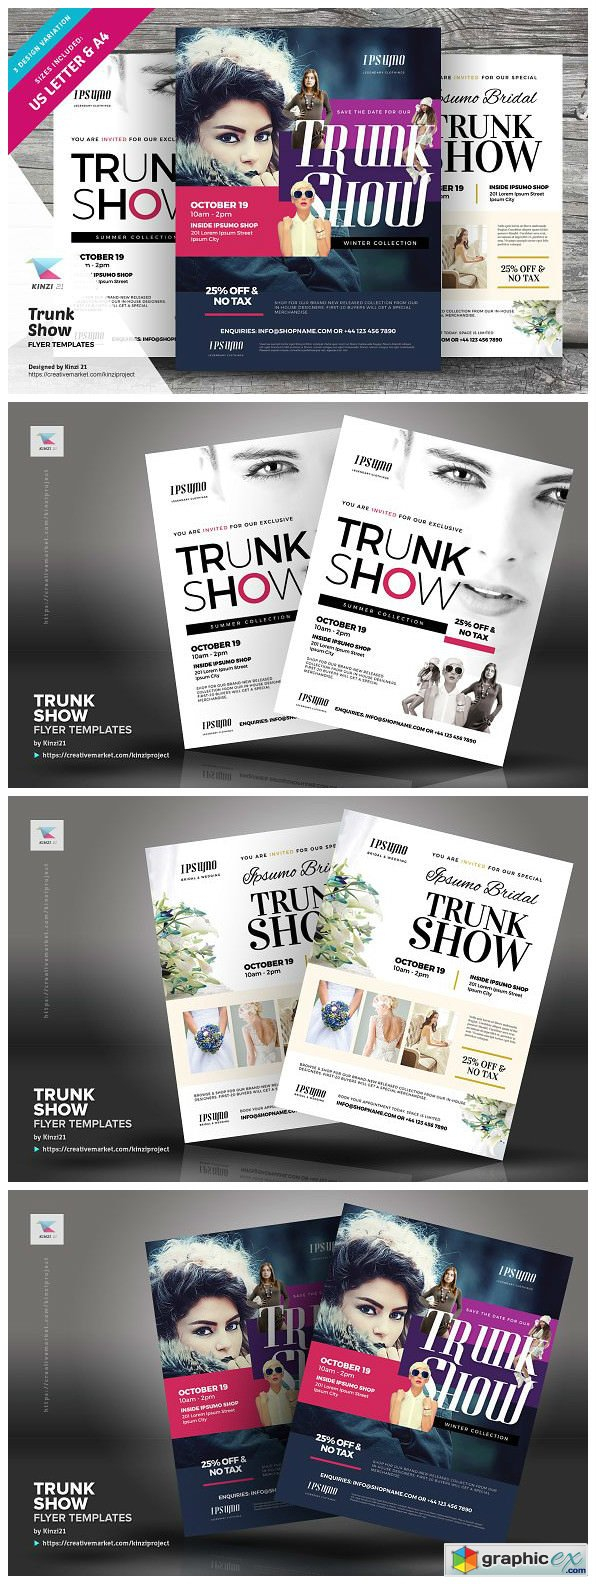 Latest Articles » page 10 » Free Download Vector Stock Image  Intended For Trunk Show Flyer Template Intended For Trunk Show Flyer Template